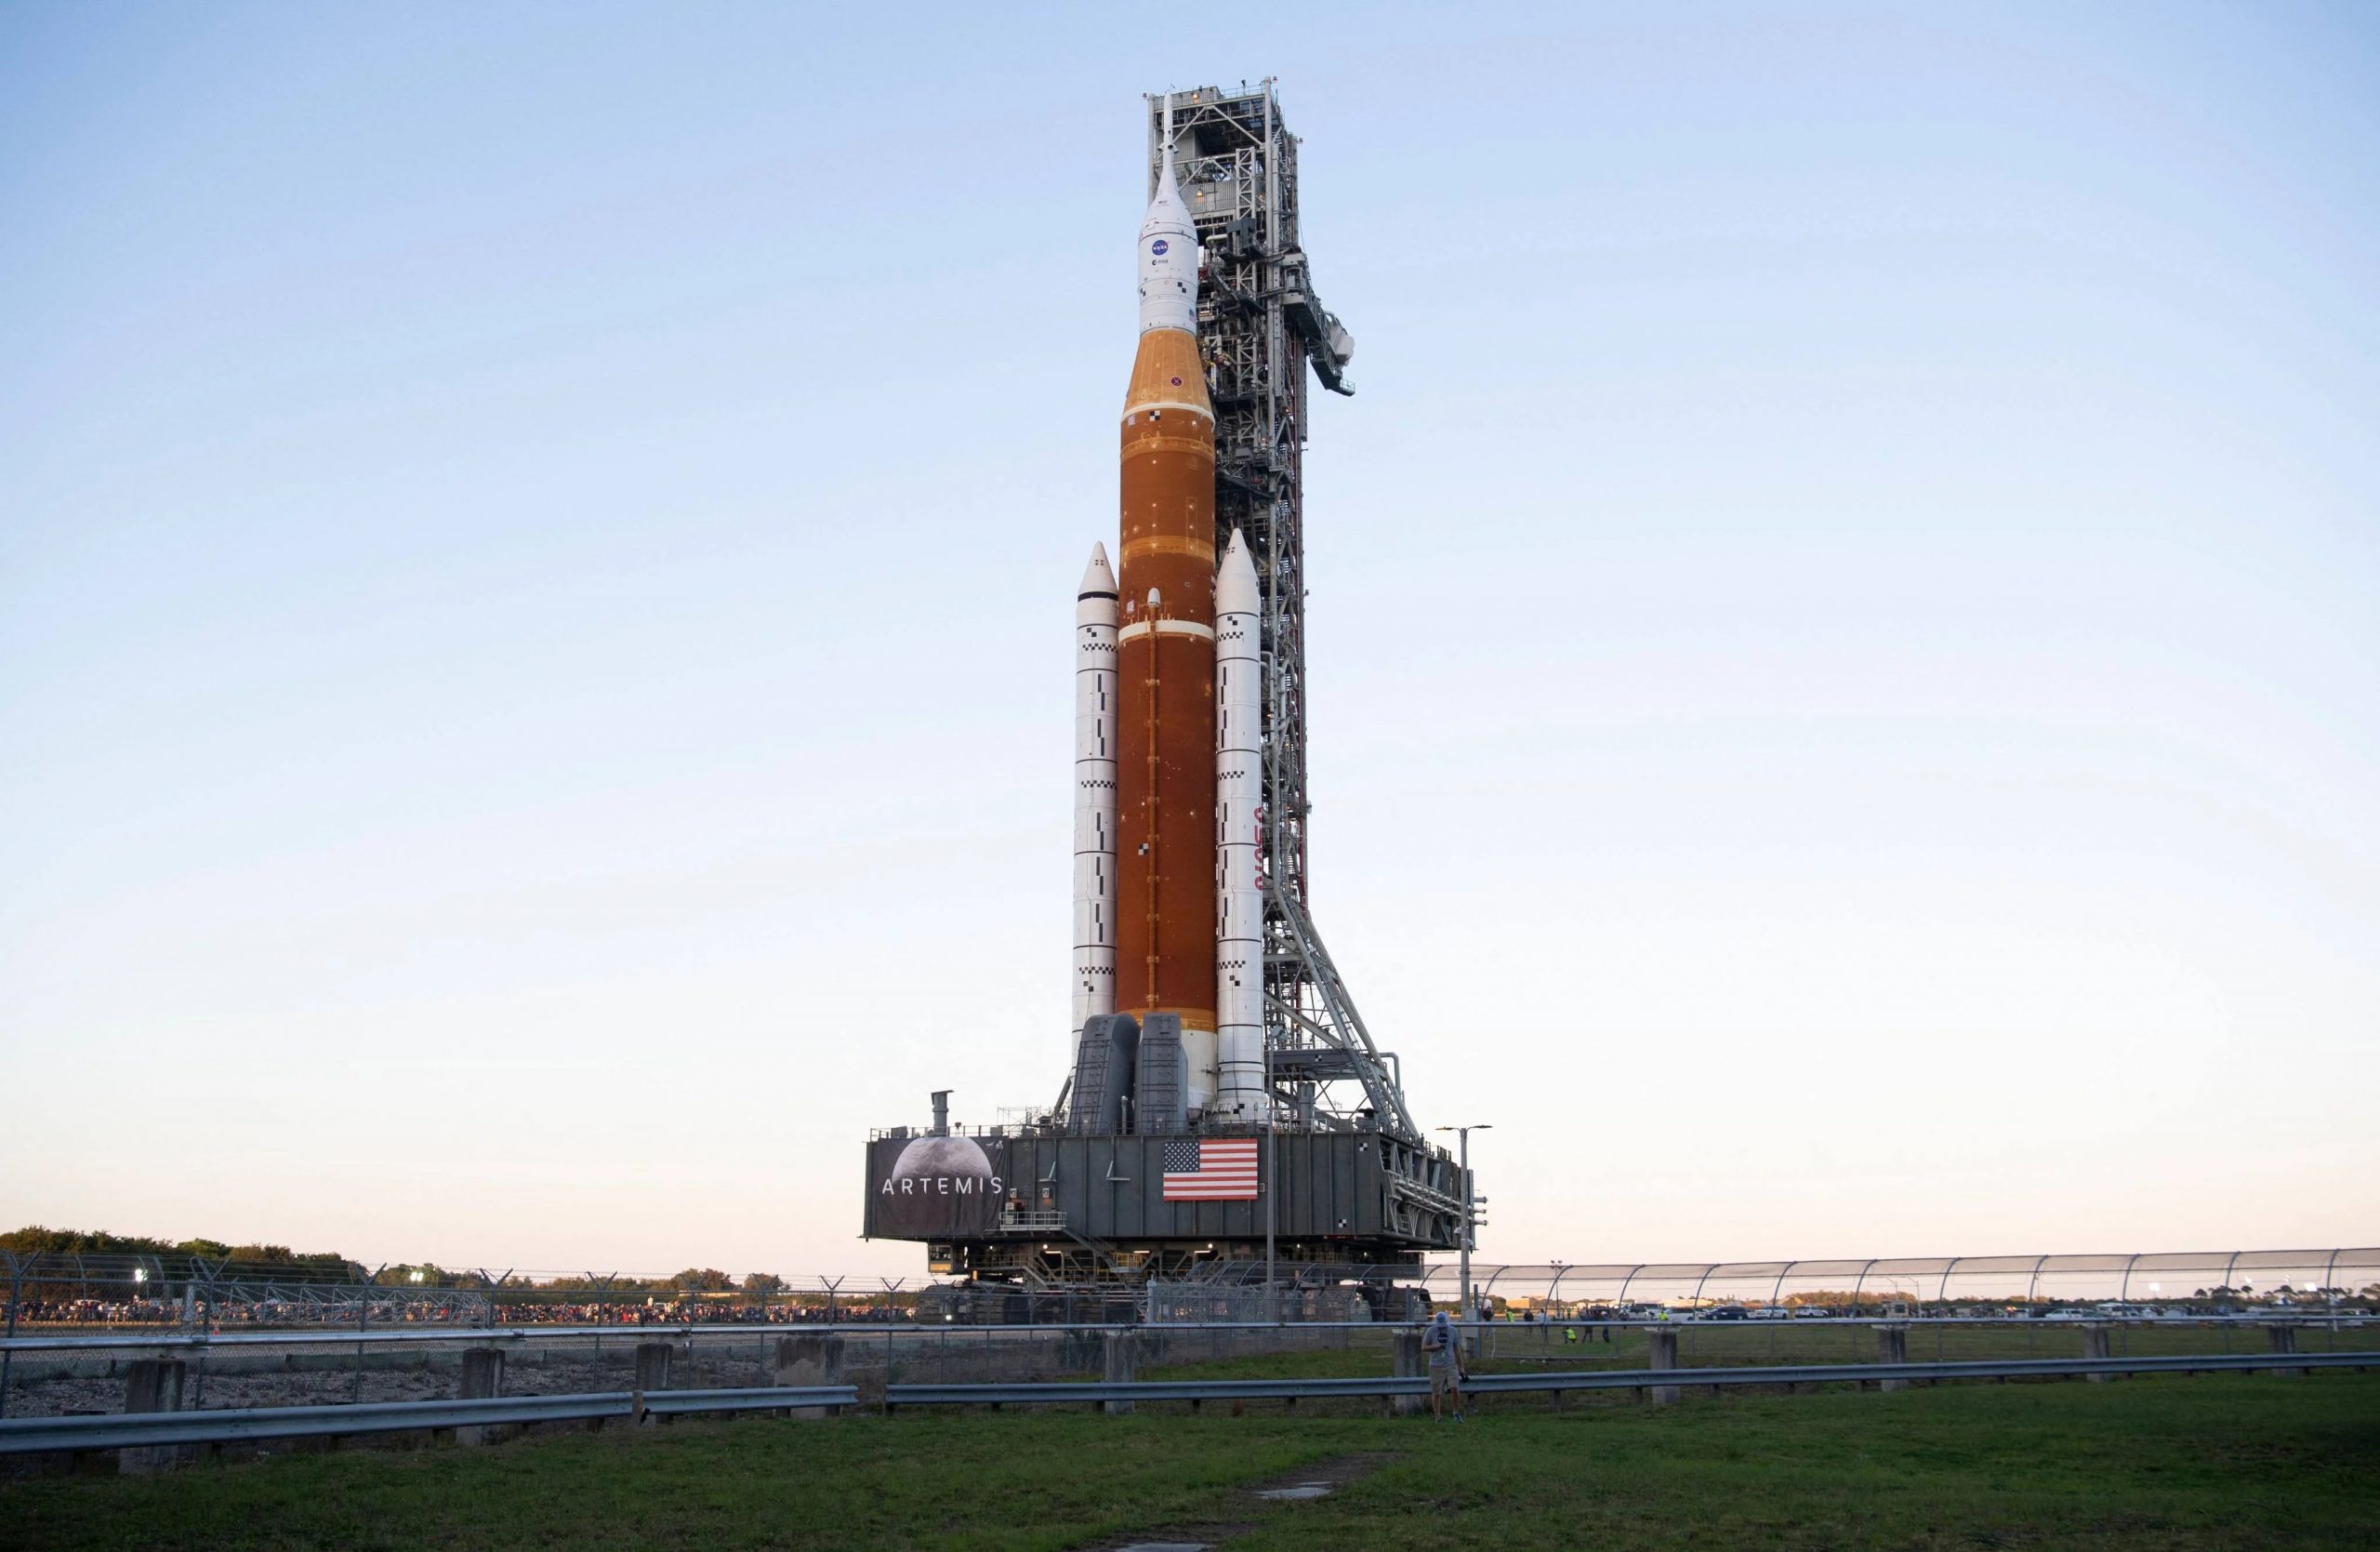 NASA’s Giant Moon Rocket Reaches the Launchpad for the First Time